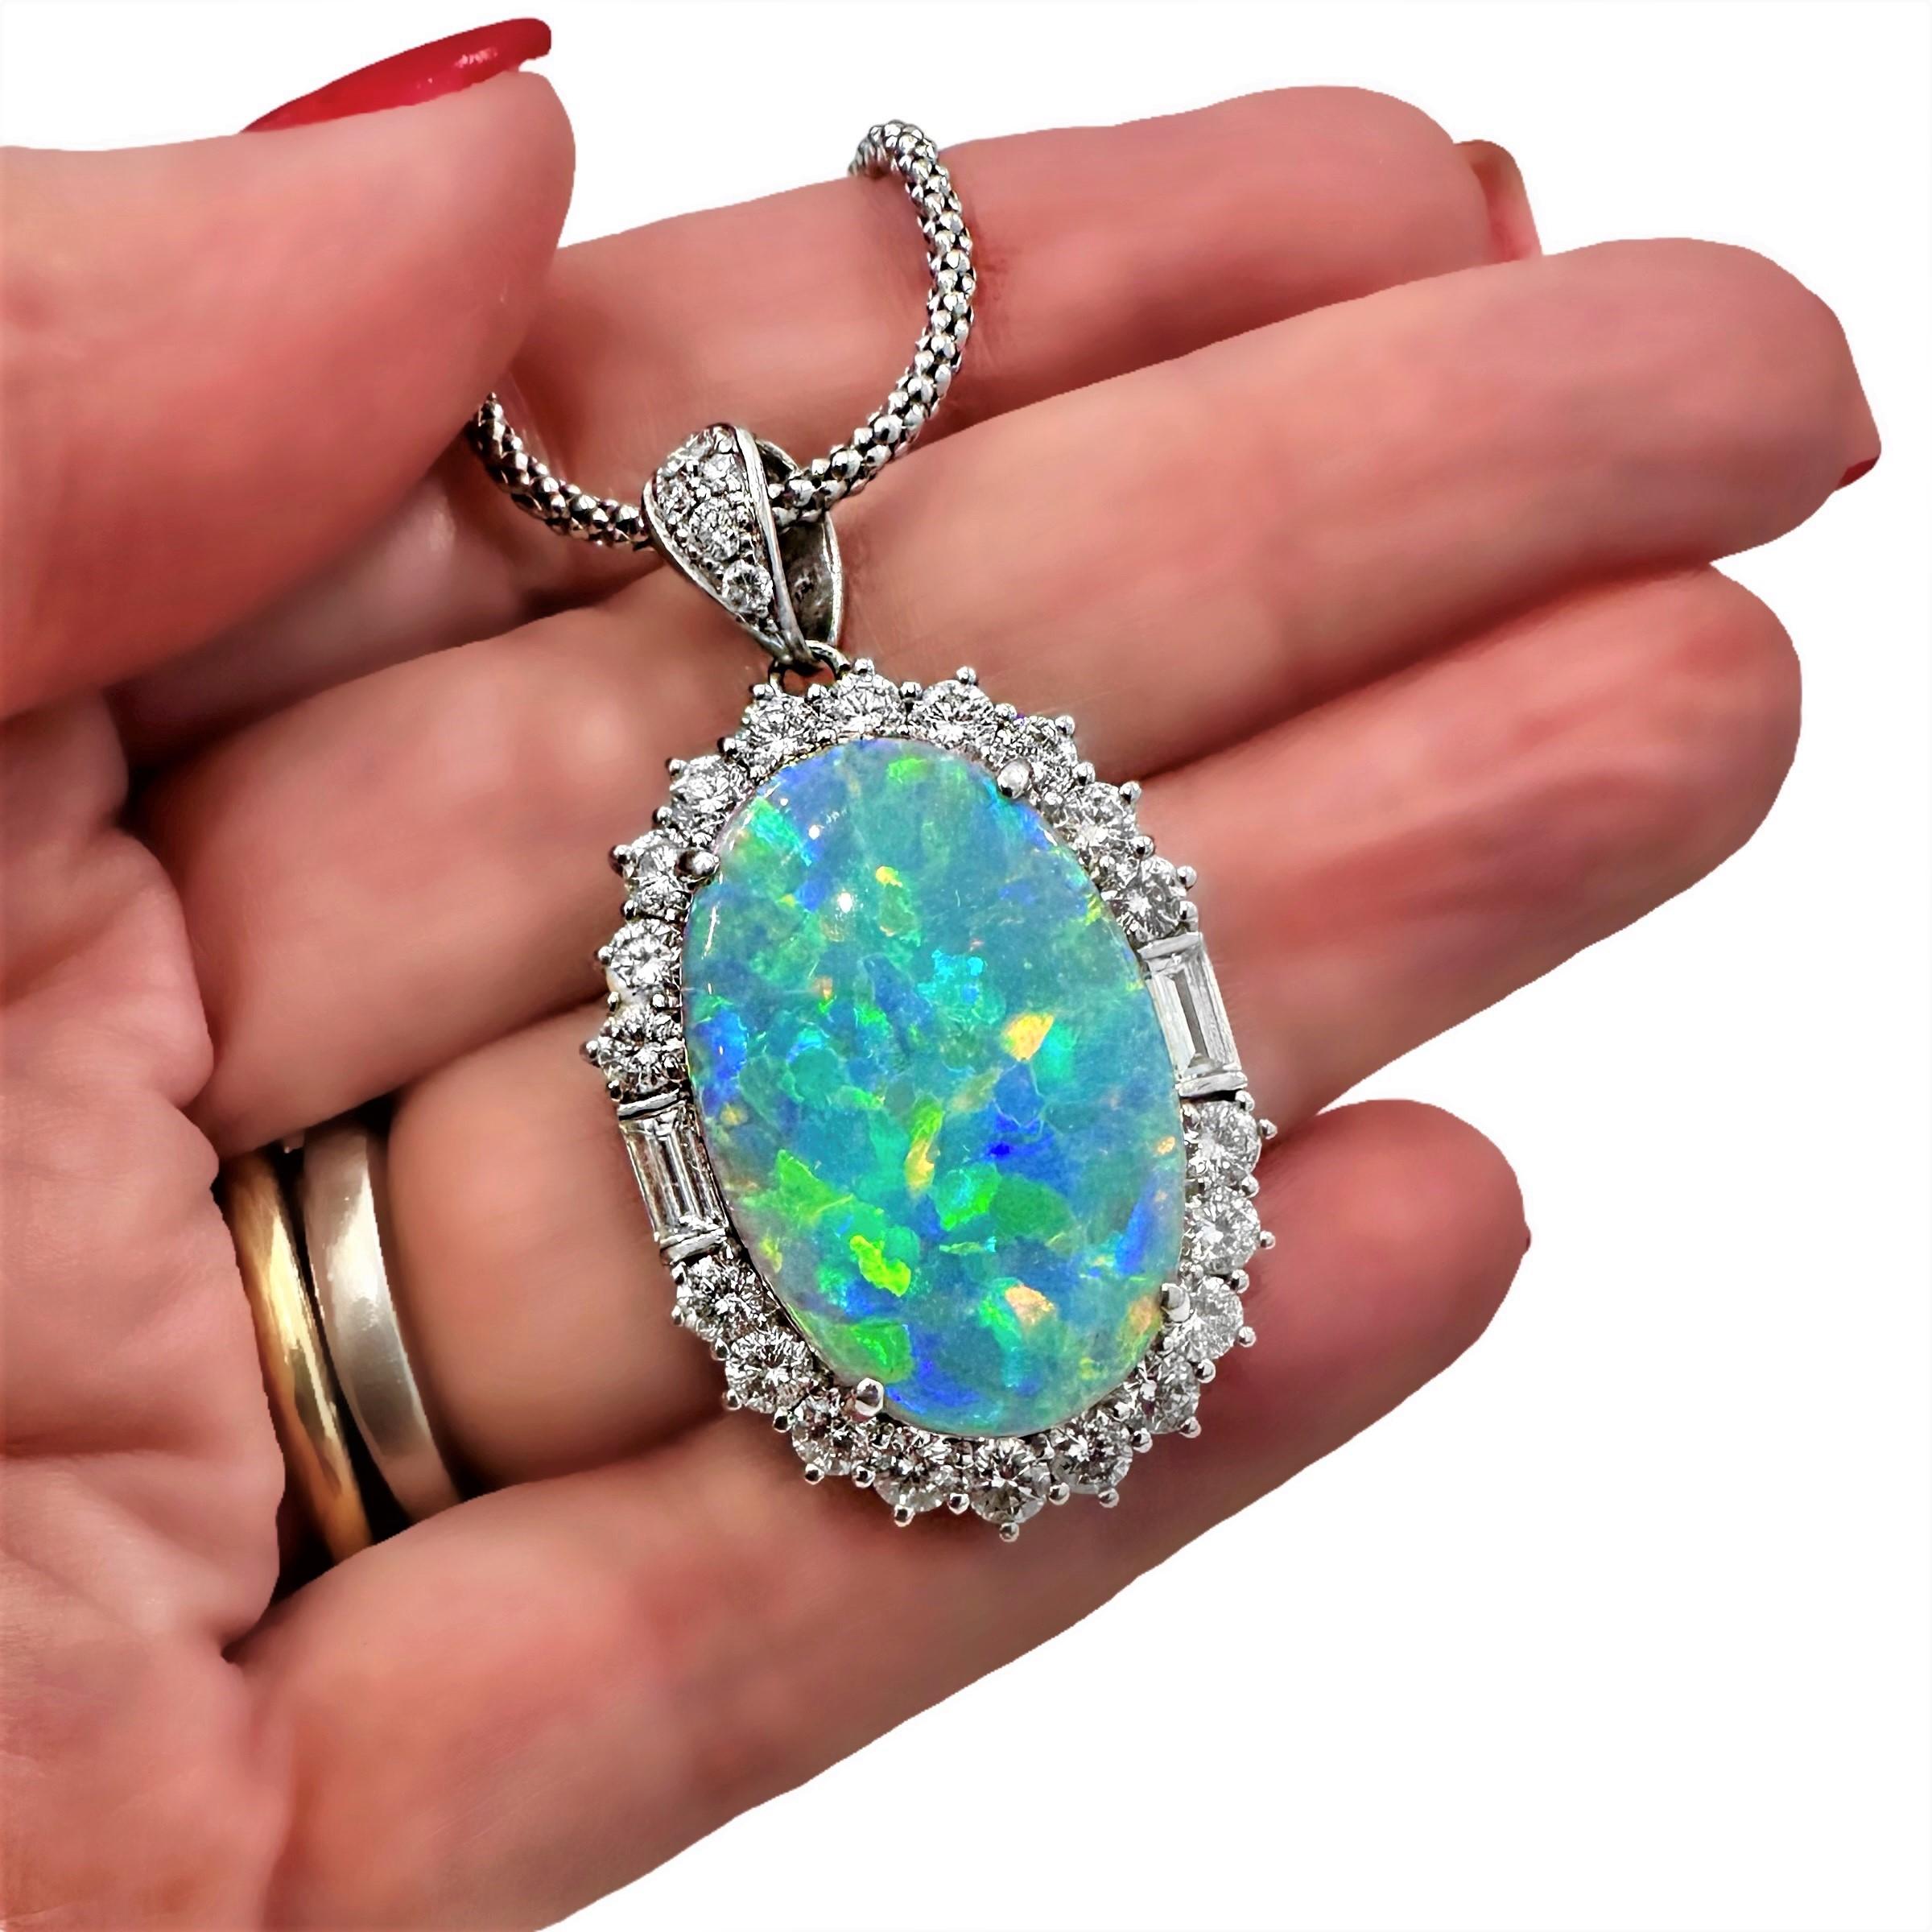 Brilliant Cut Classic Platinum Pendant with Opal Center Surrounded by Diamonds For Sale